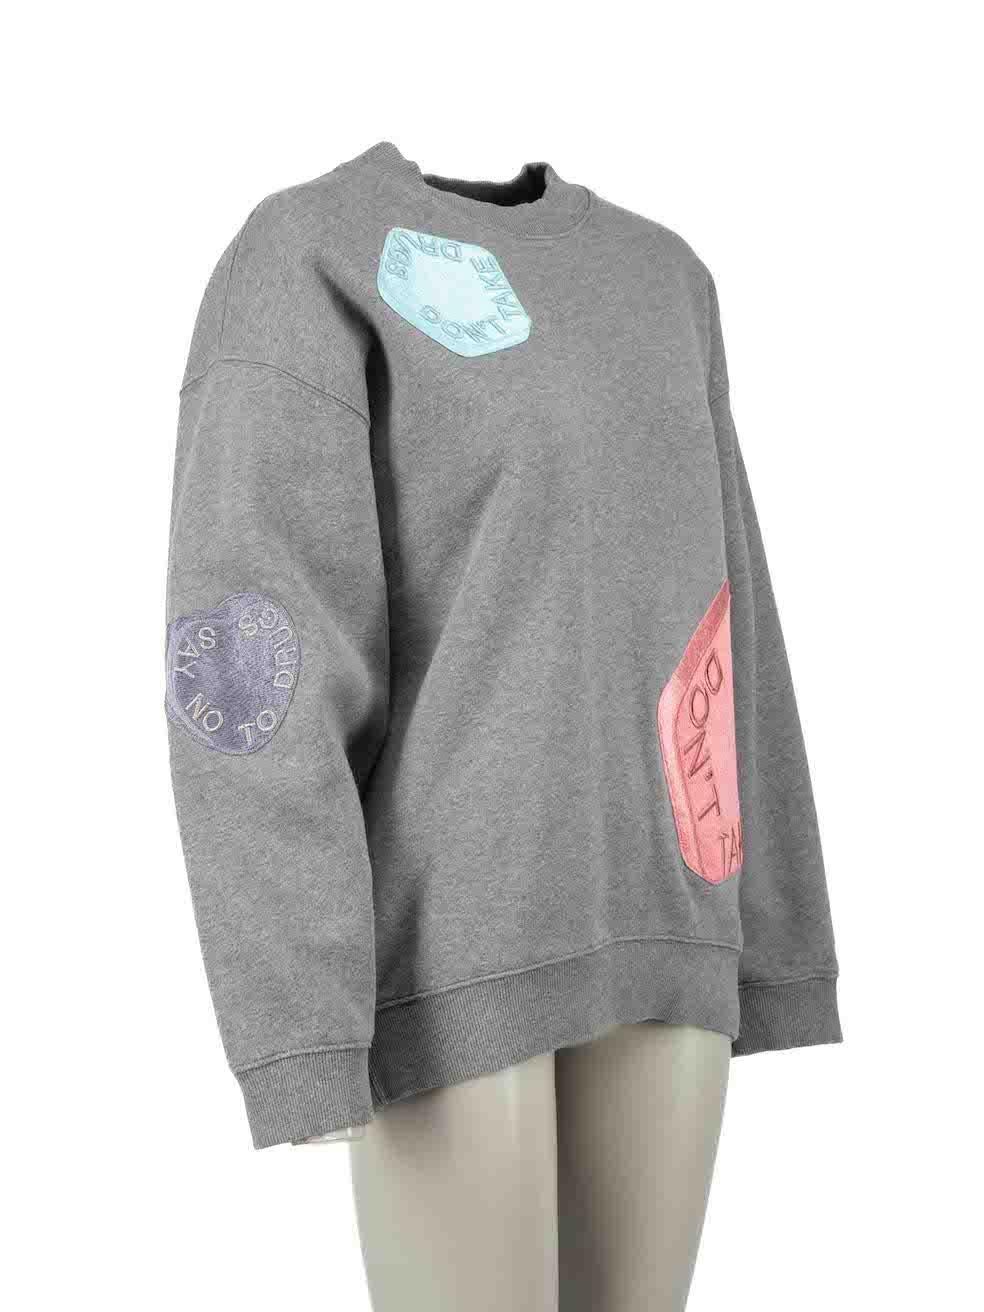 CONDITION is Very good. Minimal wear to jumper is evident. Minimal wear to the front with small marks on this used Acne Studios designer resale item.
 
Details
Beta Allover
Grey
Cotton
Long sleeves sweatshirt
'Say No To Drugs' patchwork detail
Crew